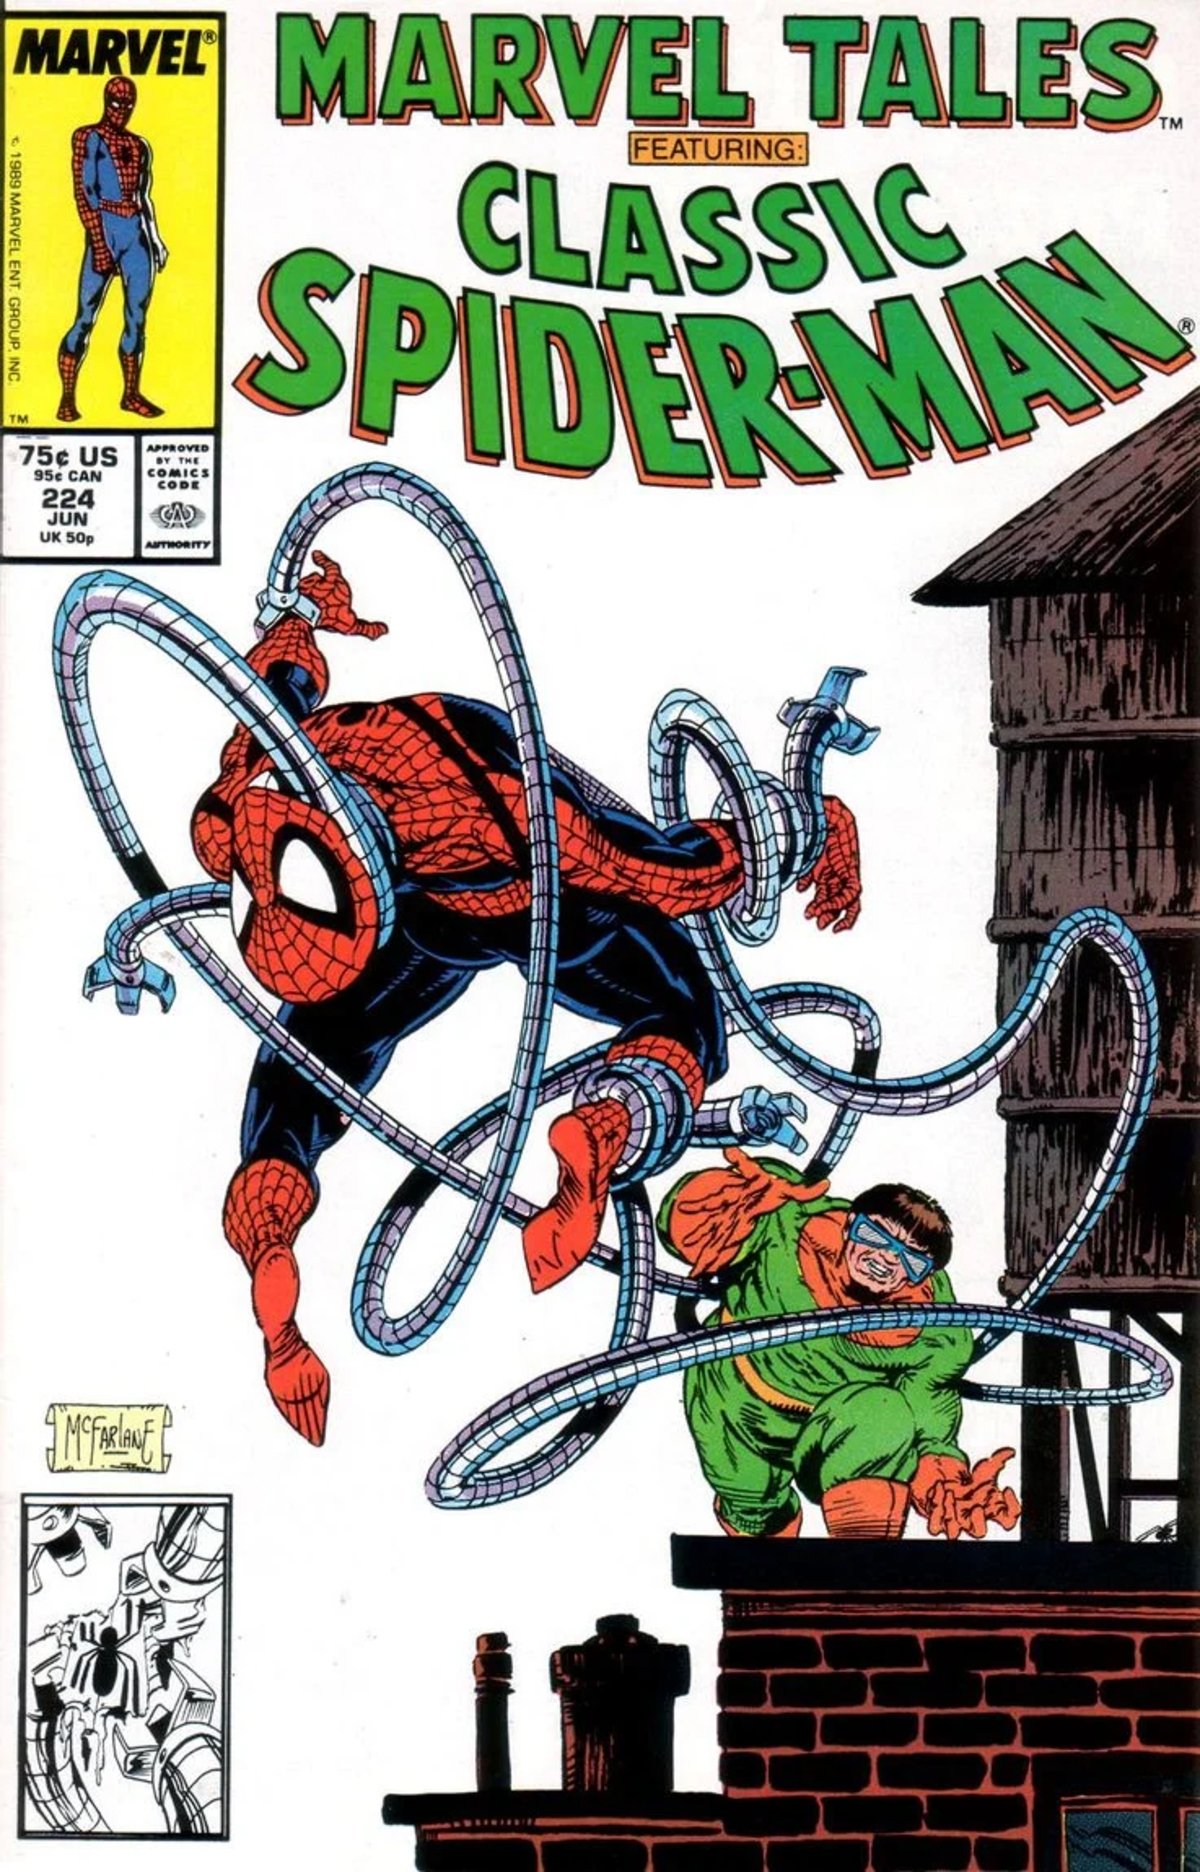 An Image From Spider-Man: No Way Home Pays Homage To An Iconic Todd McFarlane Cover